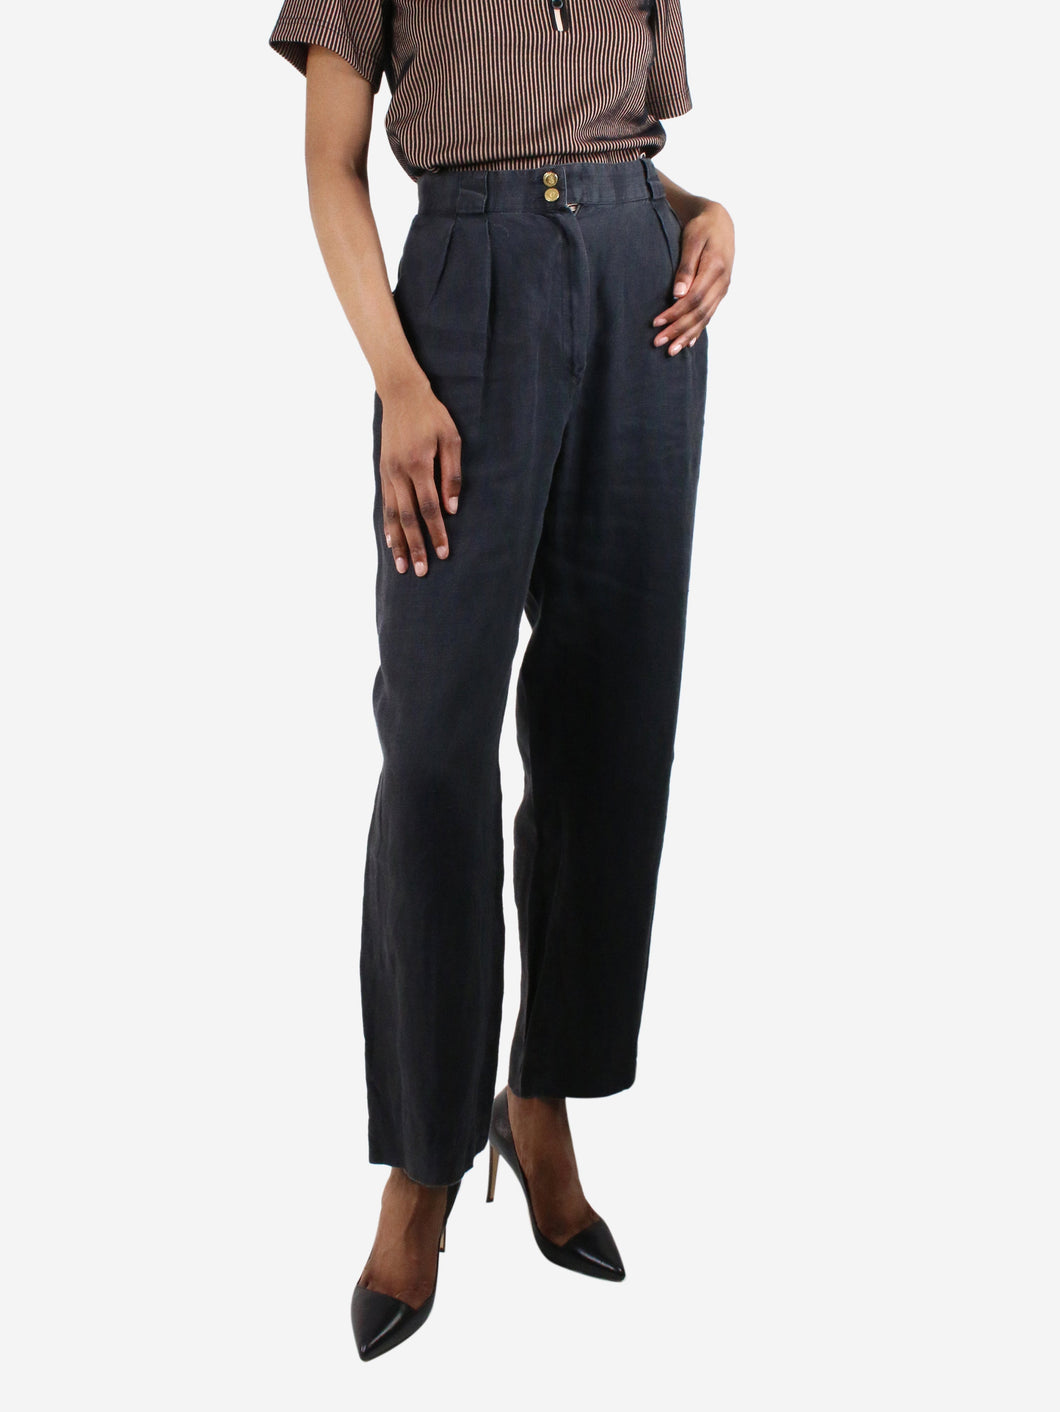 Black high-rise trousers - size UK 6 Trousers Chanel Boutique 